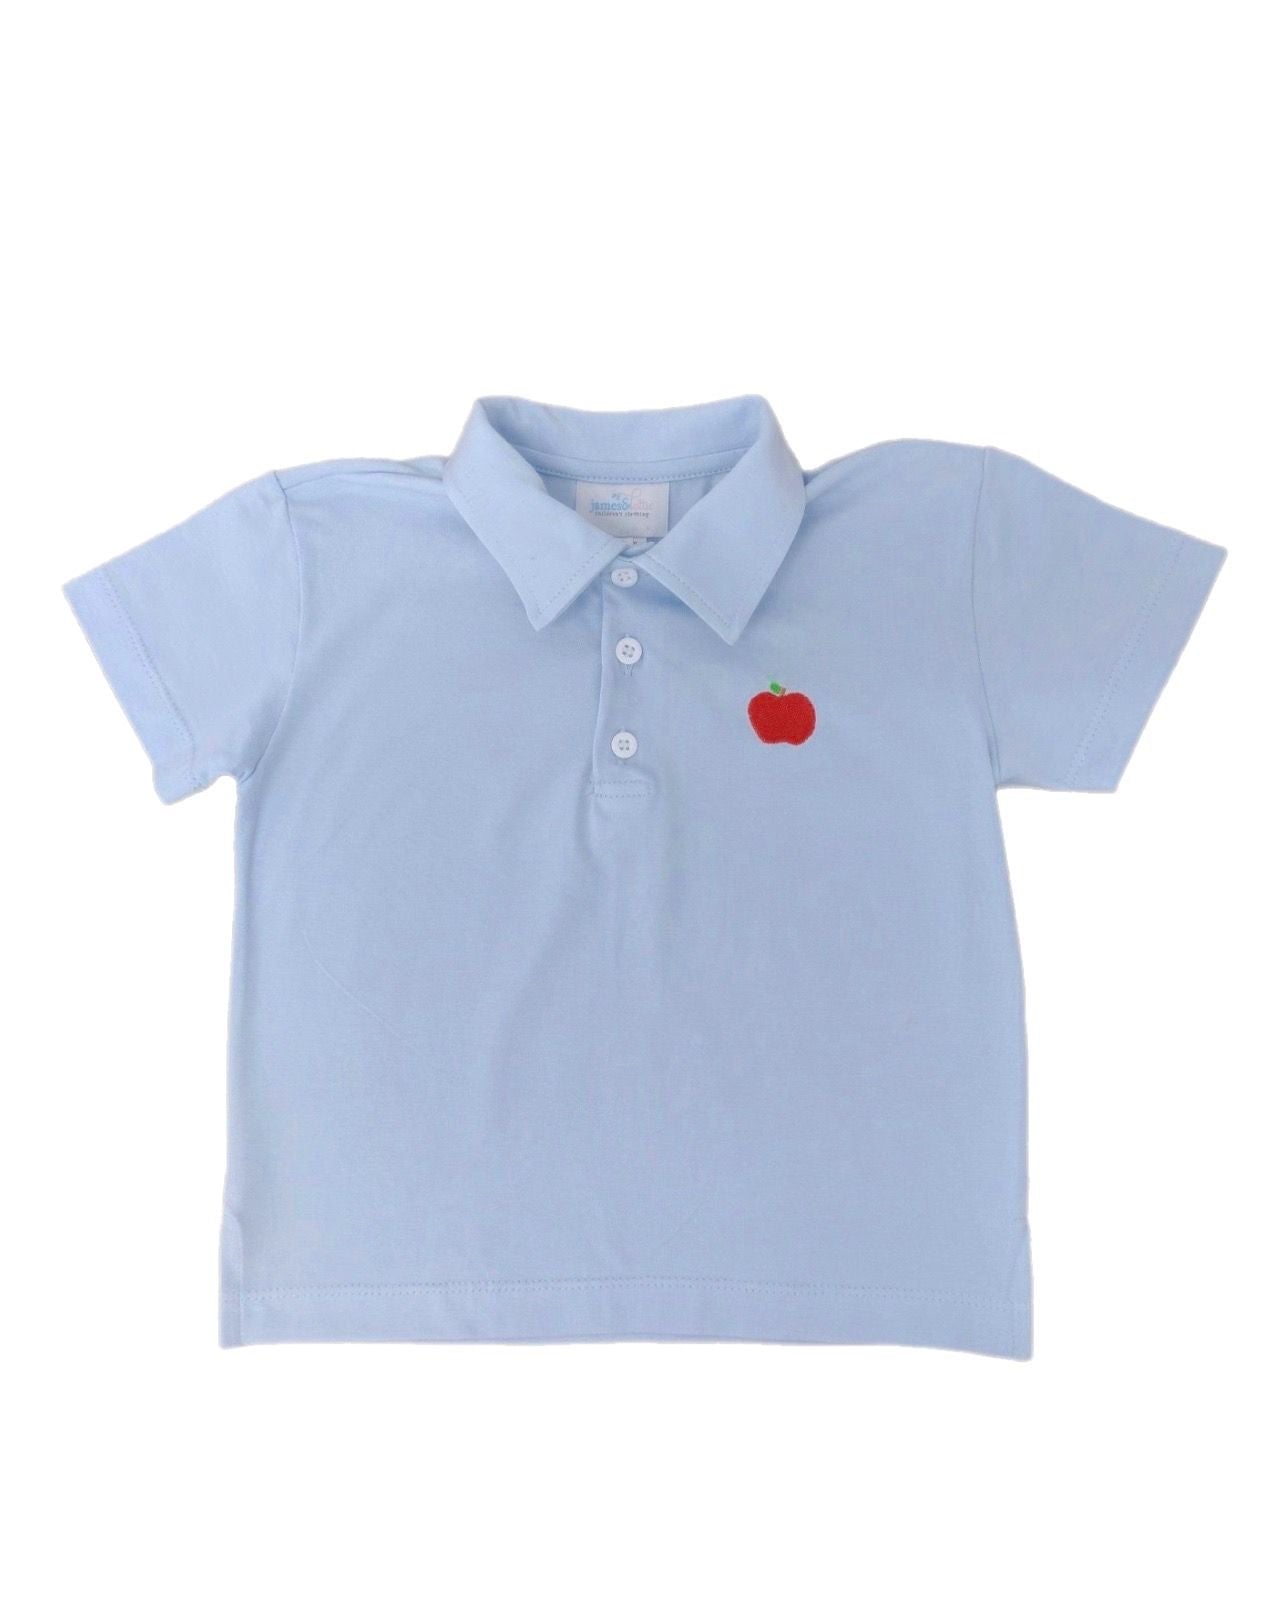 Blue Polo with Red Apple Embroidery